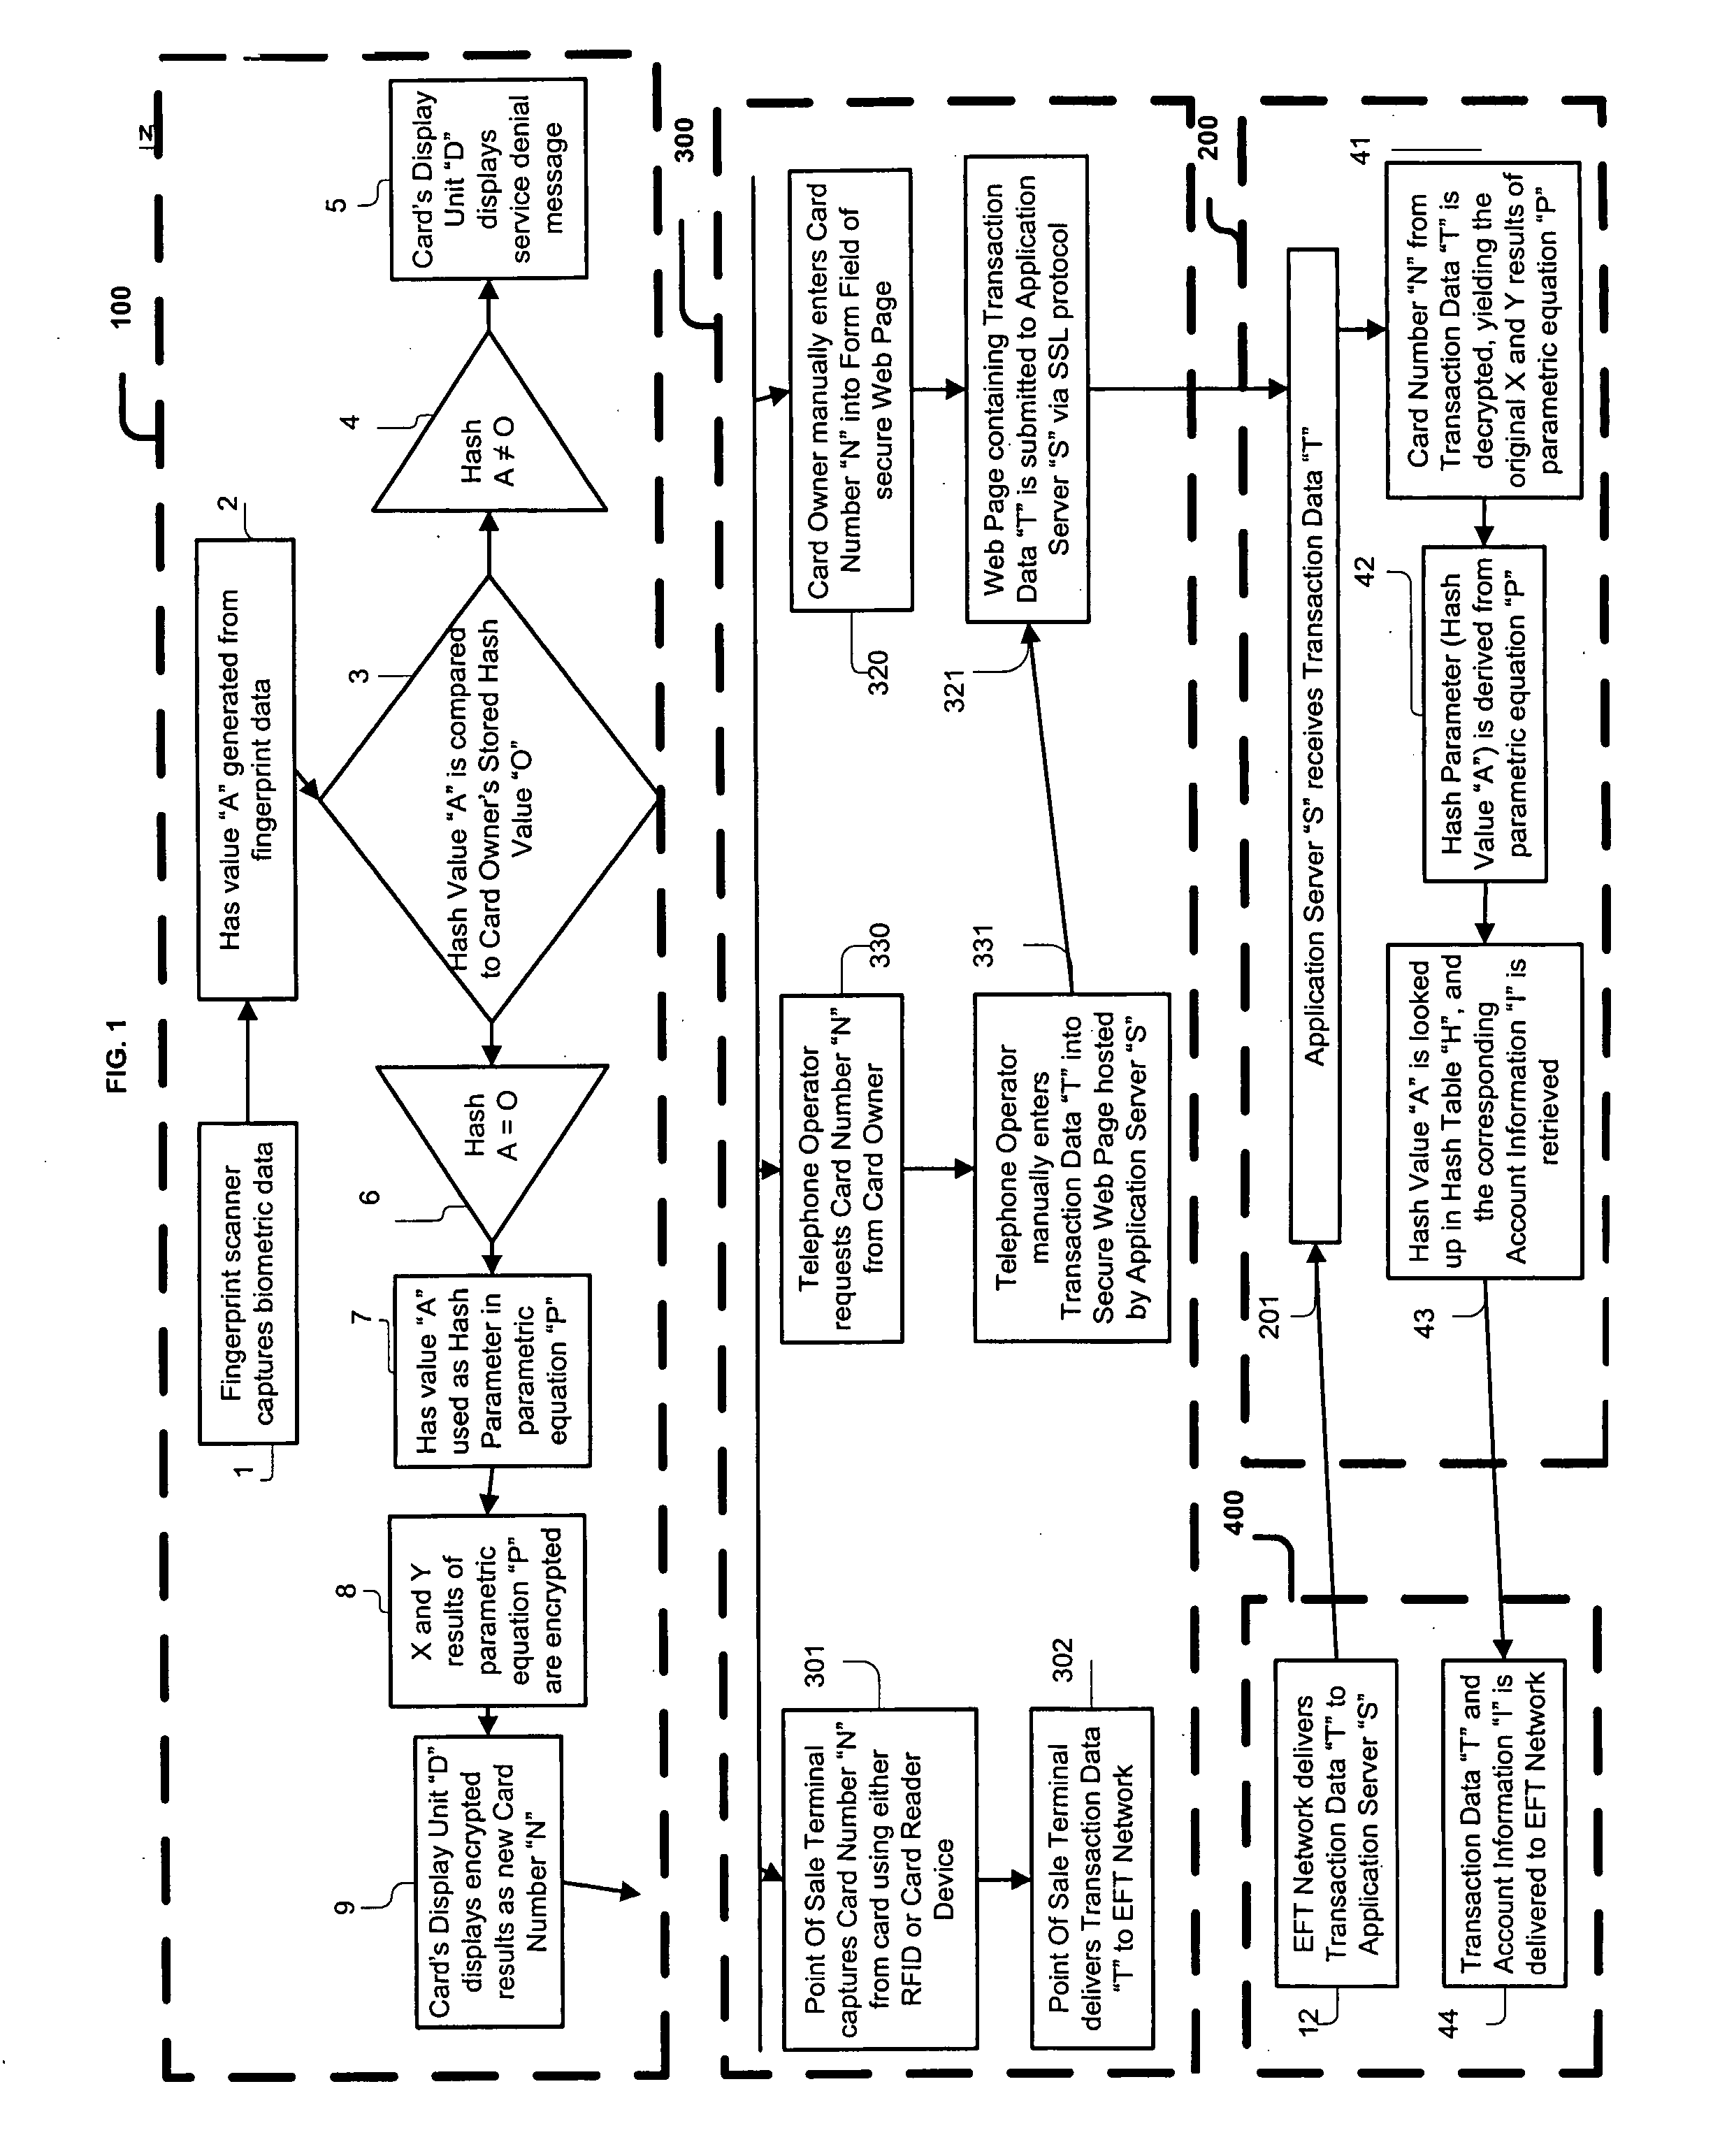 System, Method, and Apparatus for Preventing Identity Fraud Associated With Payment and Identity Cards